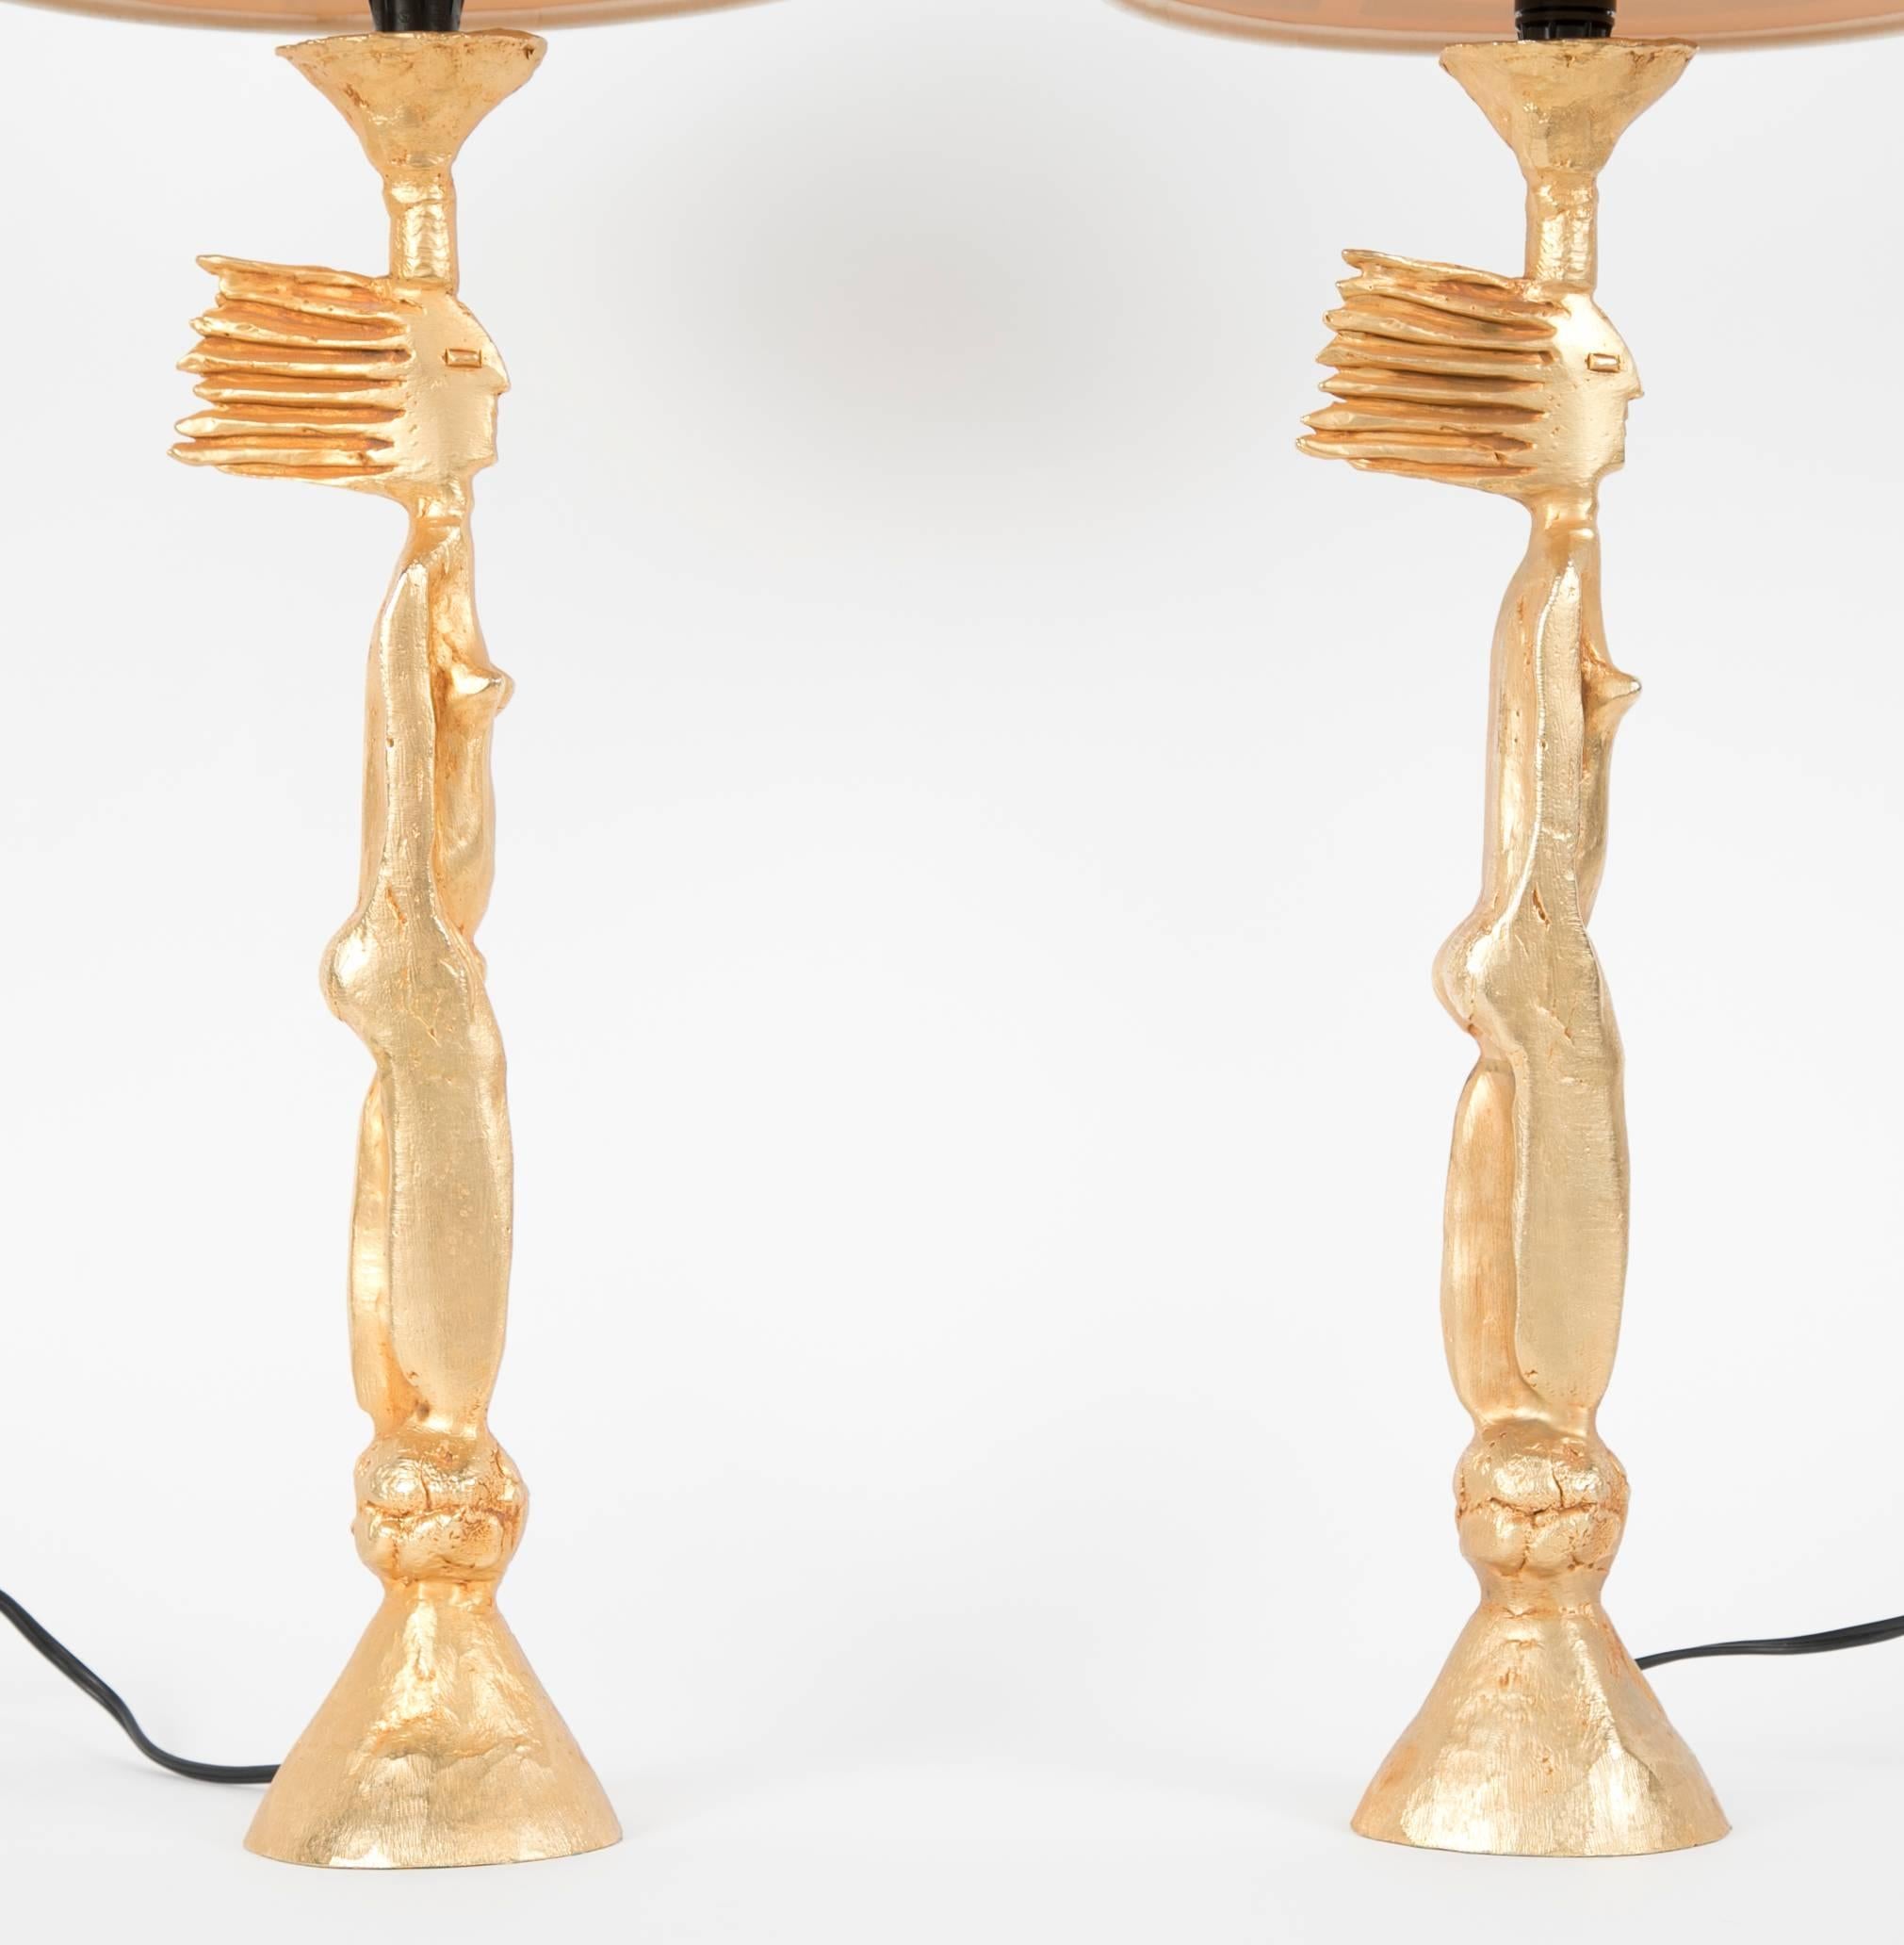 A matched pair of gold-plated metal lamps depicting nude women by Pierre Casenove. The lamps have their original shades, that do show some signs of age. One lamp retains more of its original gilding than the other thus the addition of the word